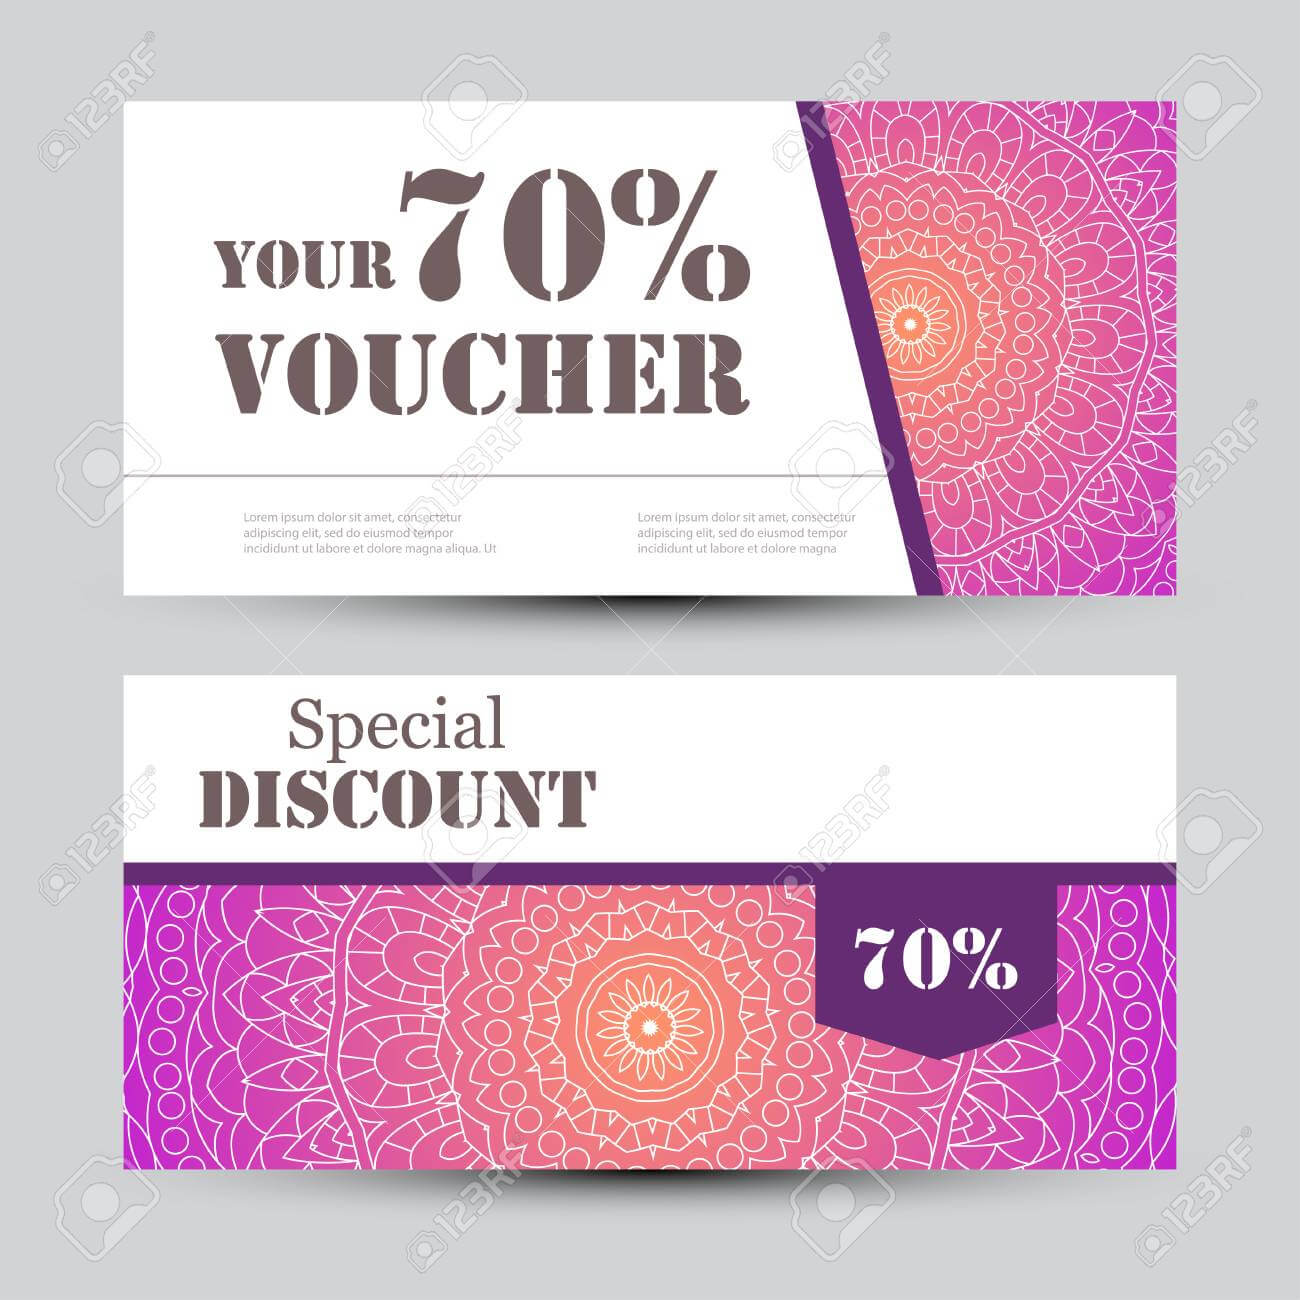 Gift Voucher Template With Mandala. Design Certificate For Sport.. Pertaining To Magazine Subscription Gift Certificate Template